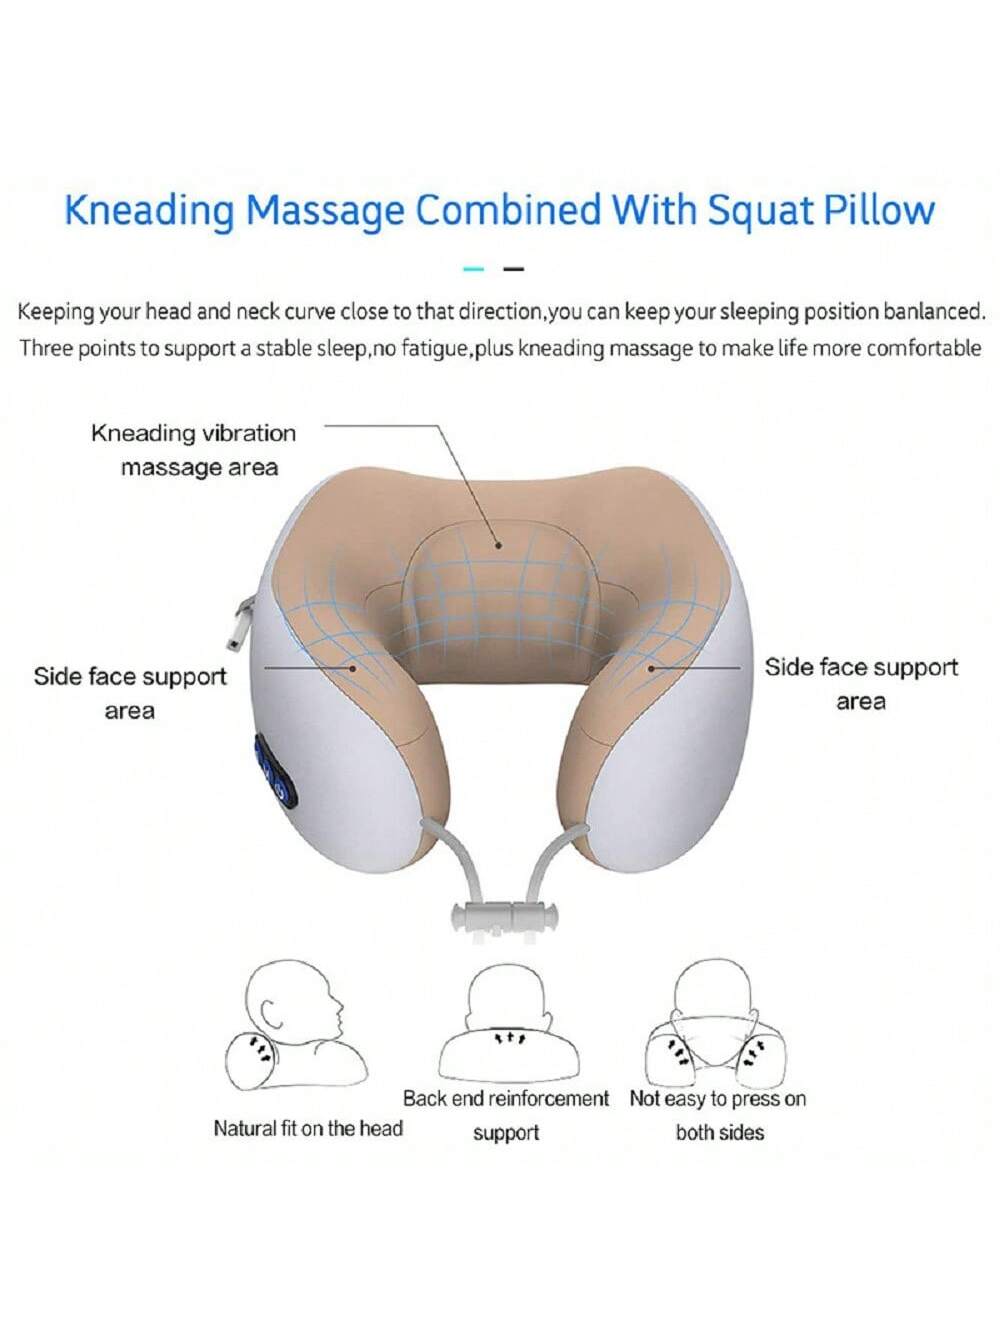 Relax Anywhere With The Portable Electric U-Shaped Neck Massager Pillow